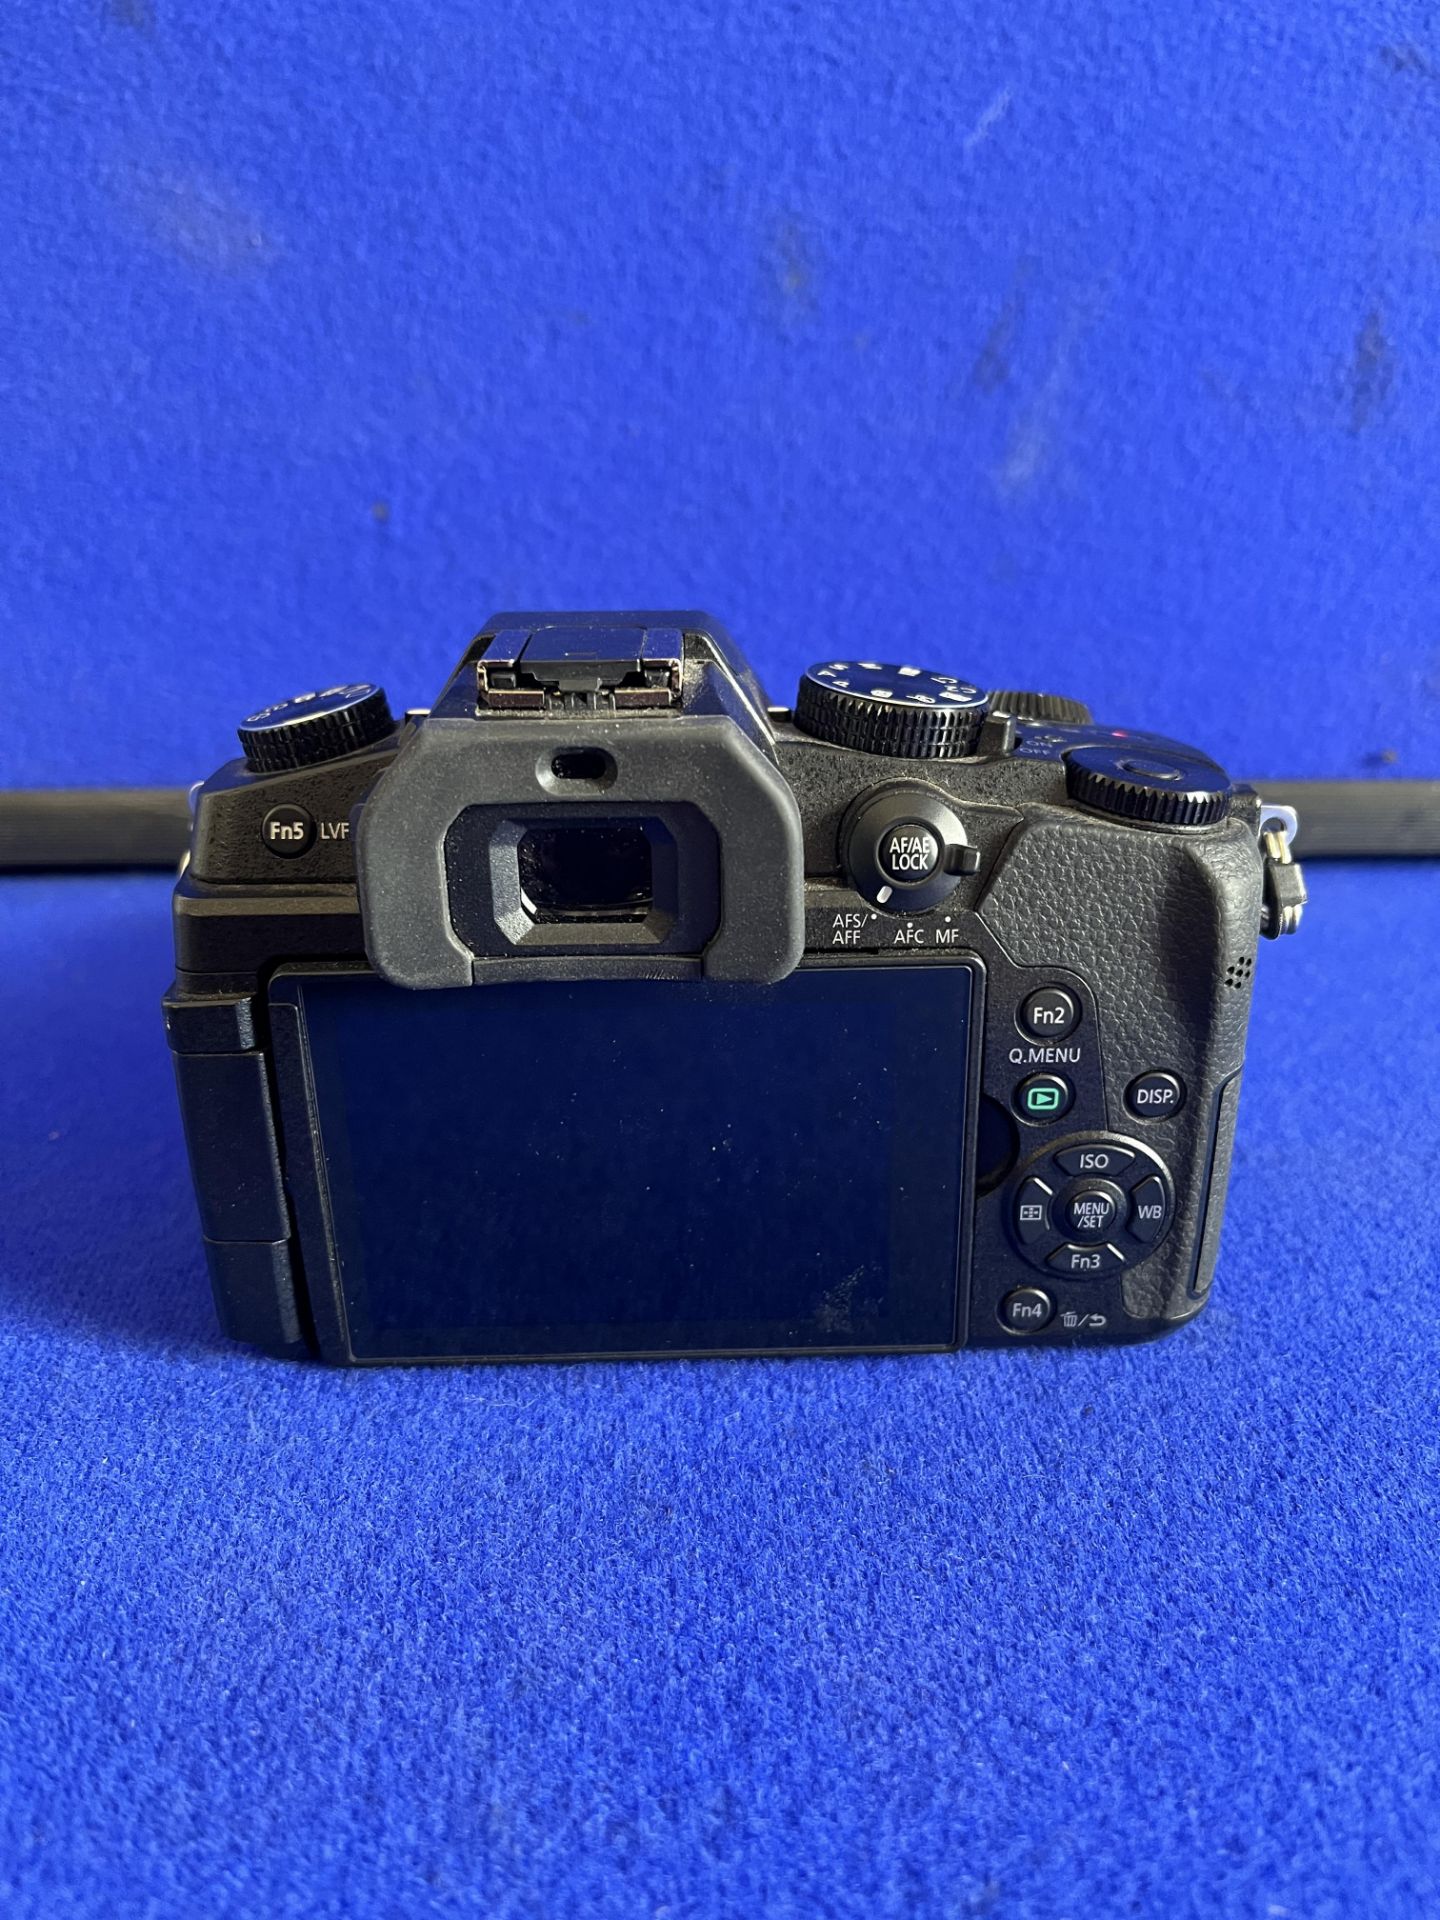 Panasonic Lumix G80 Mirrorless Camera with 46mm Lens and Battery Charger - Image 3 of 5